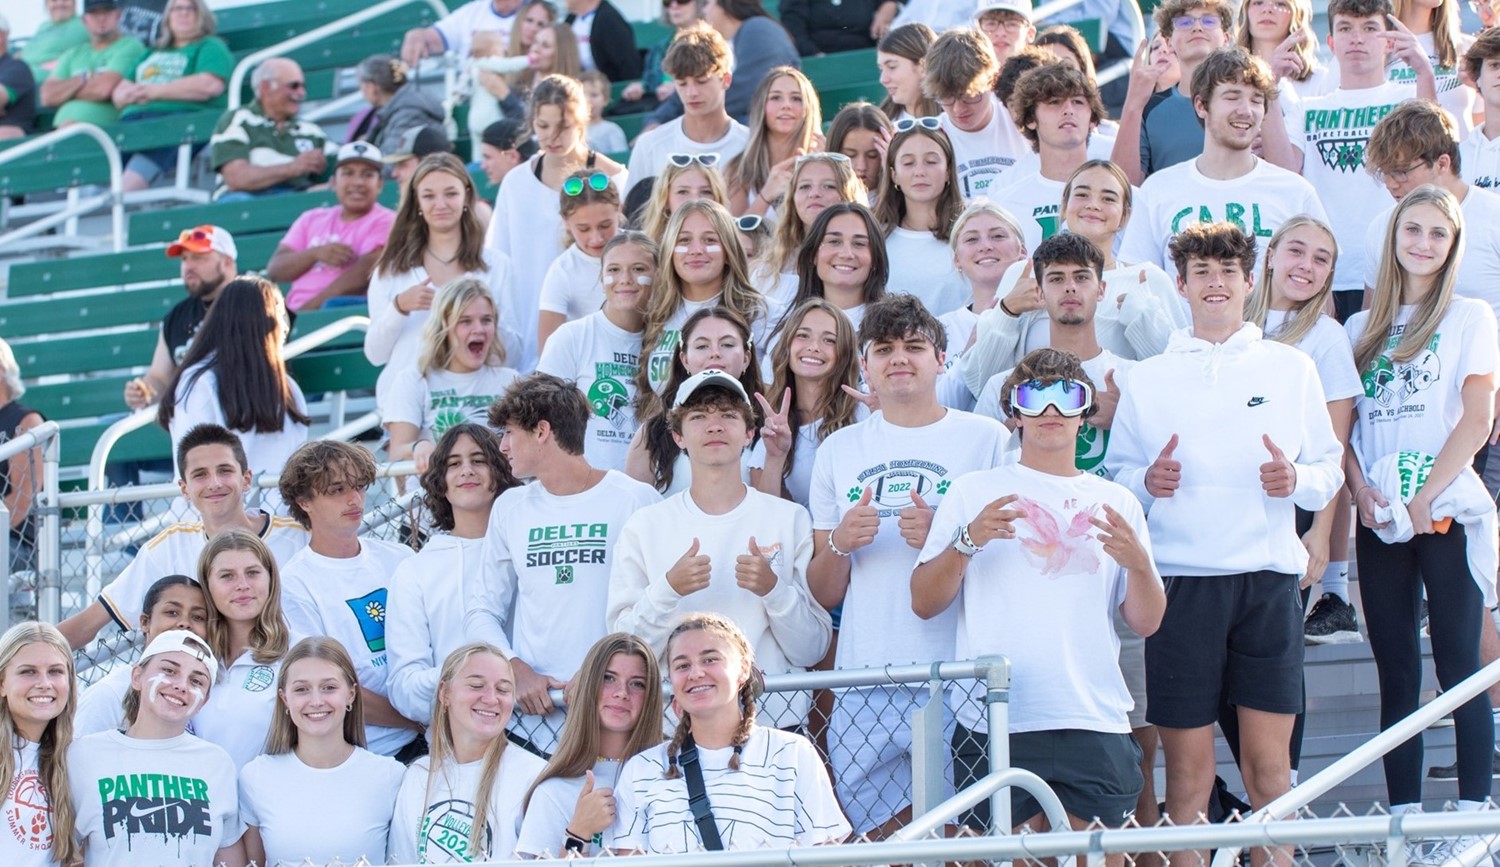 Student Section at Football Game